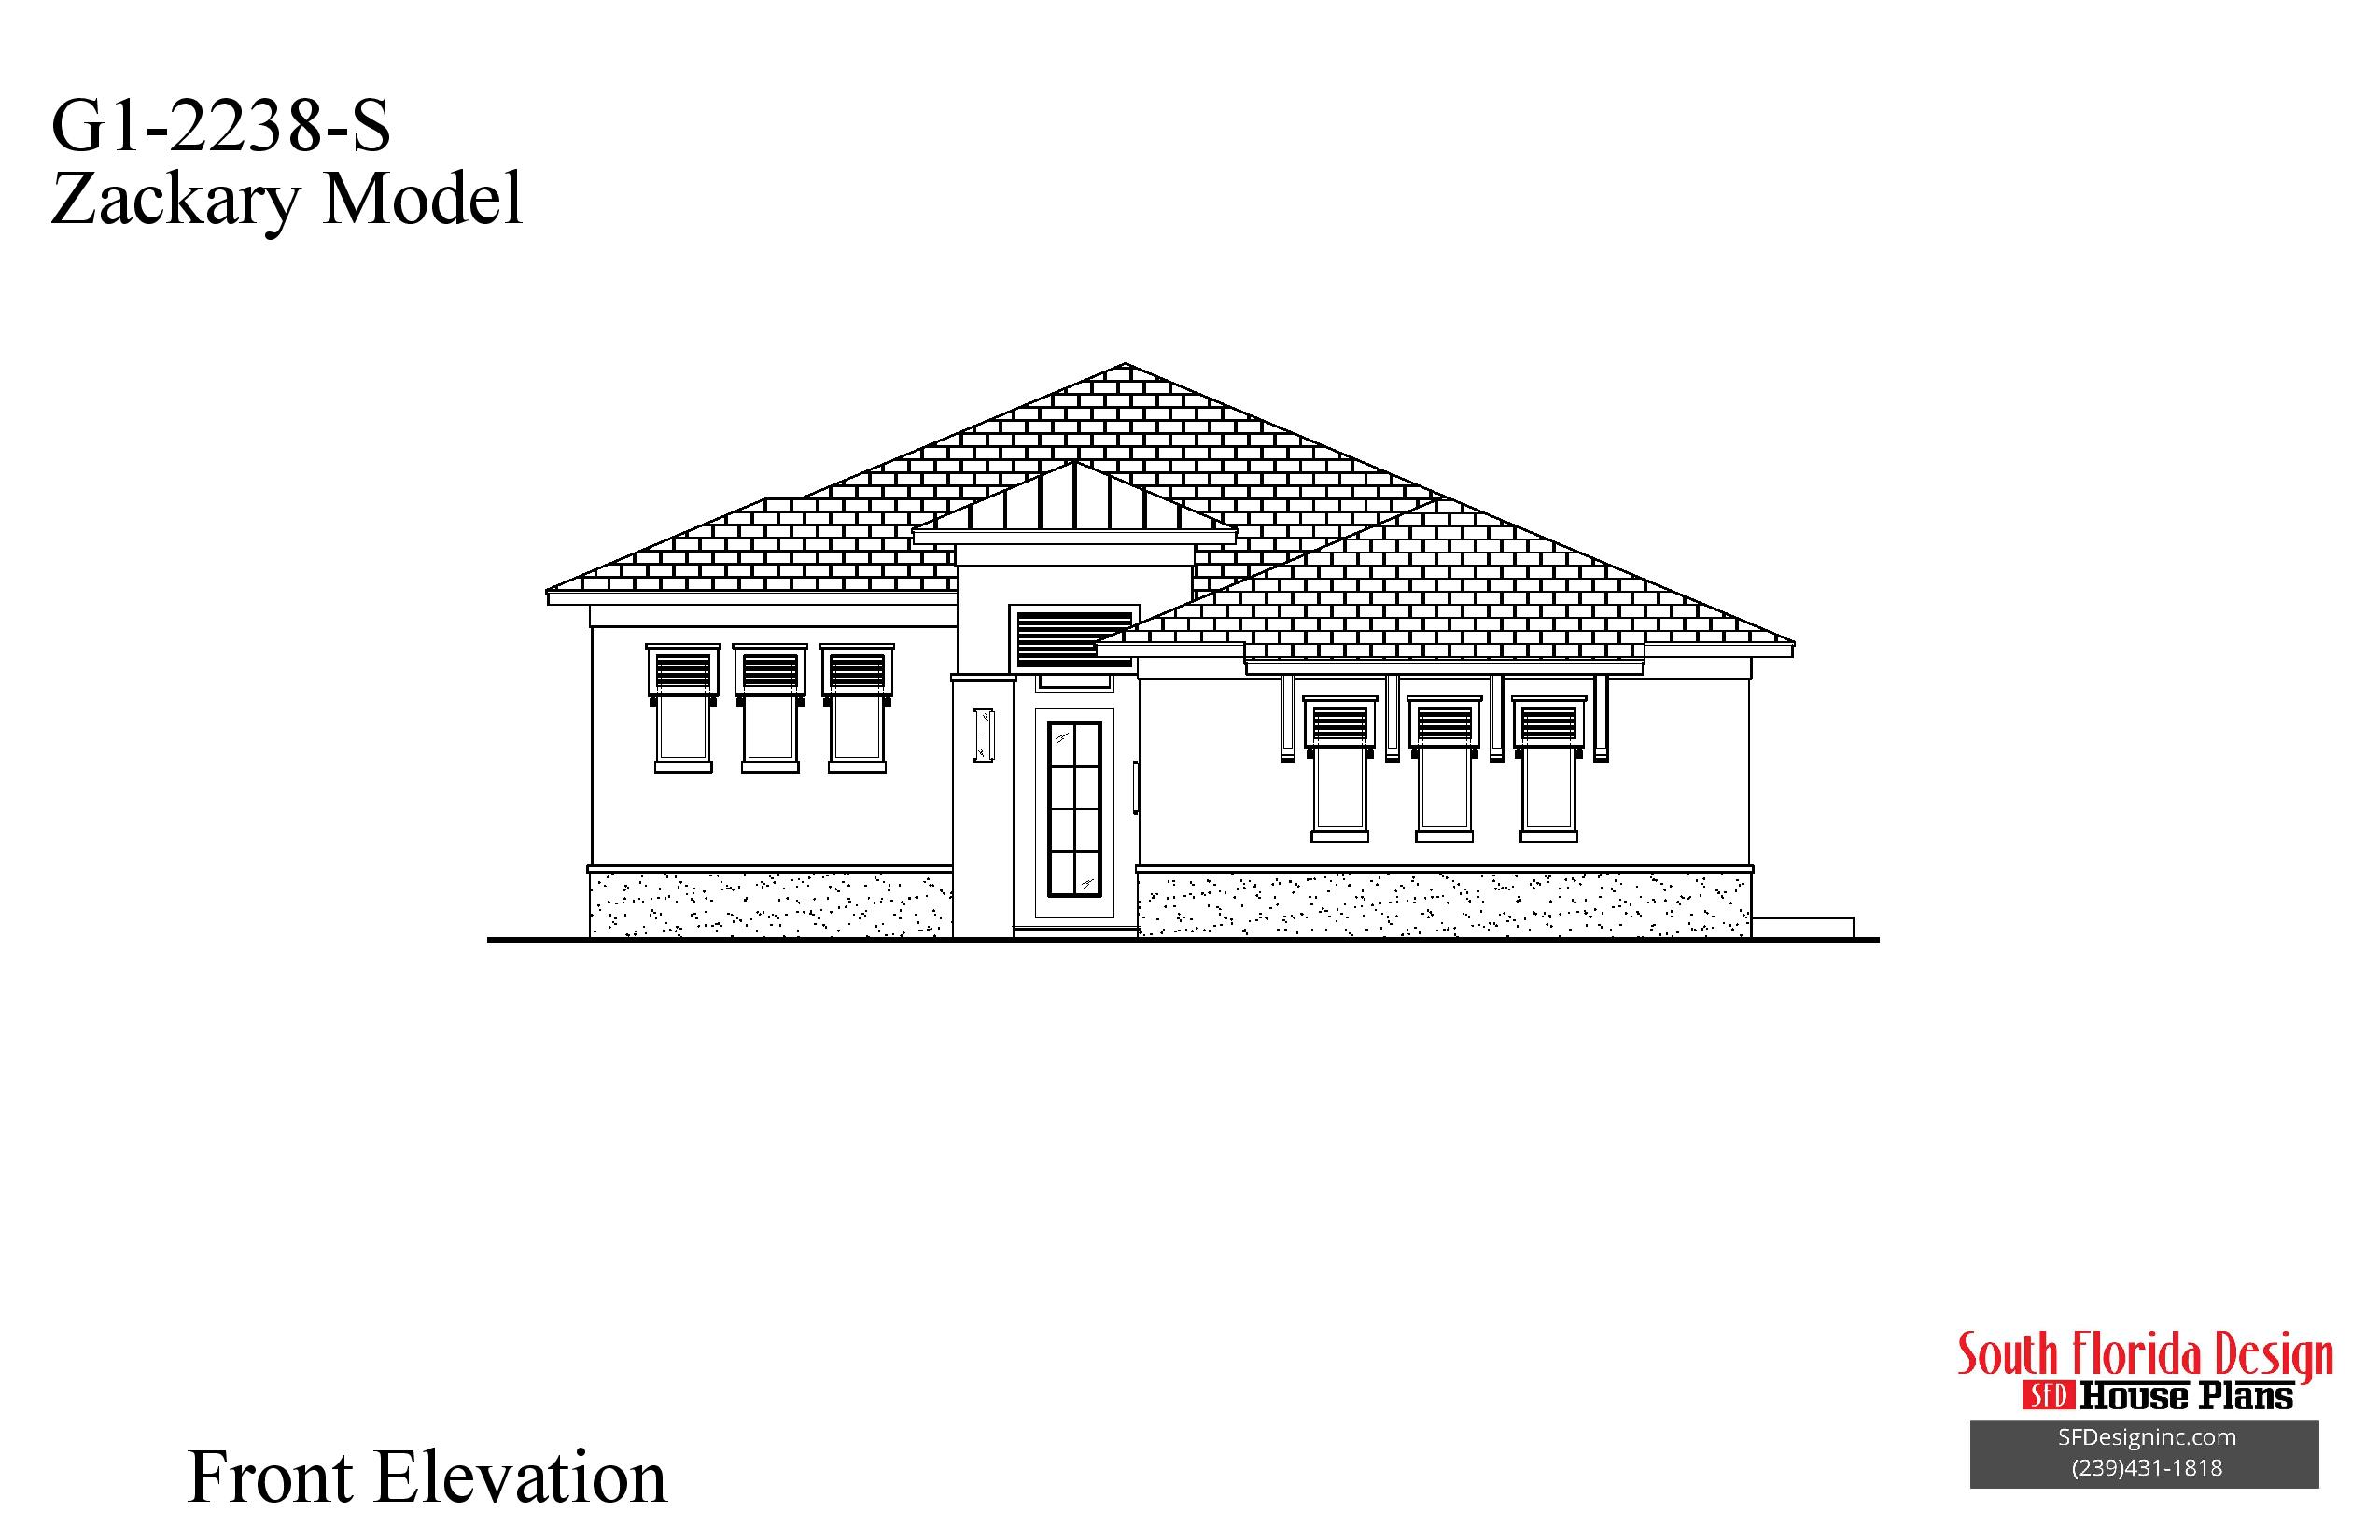 Black and white front elevation sketch of the narrow lot Zackary house plan